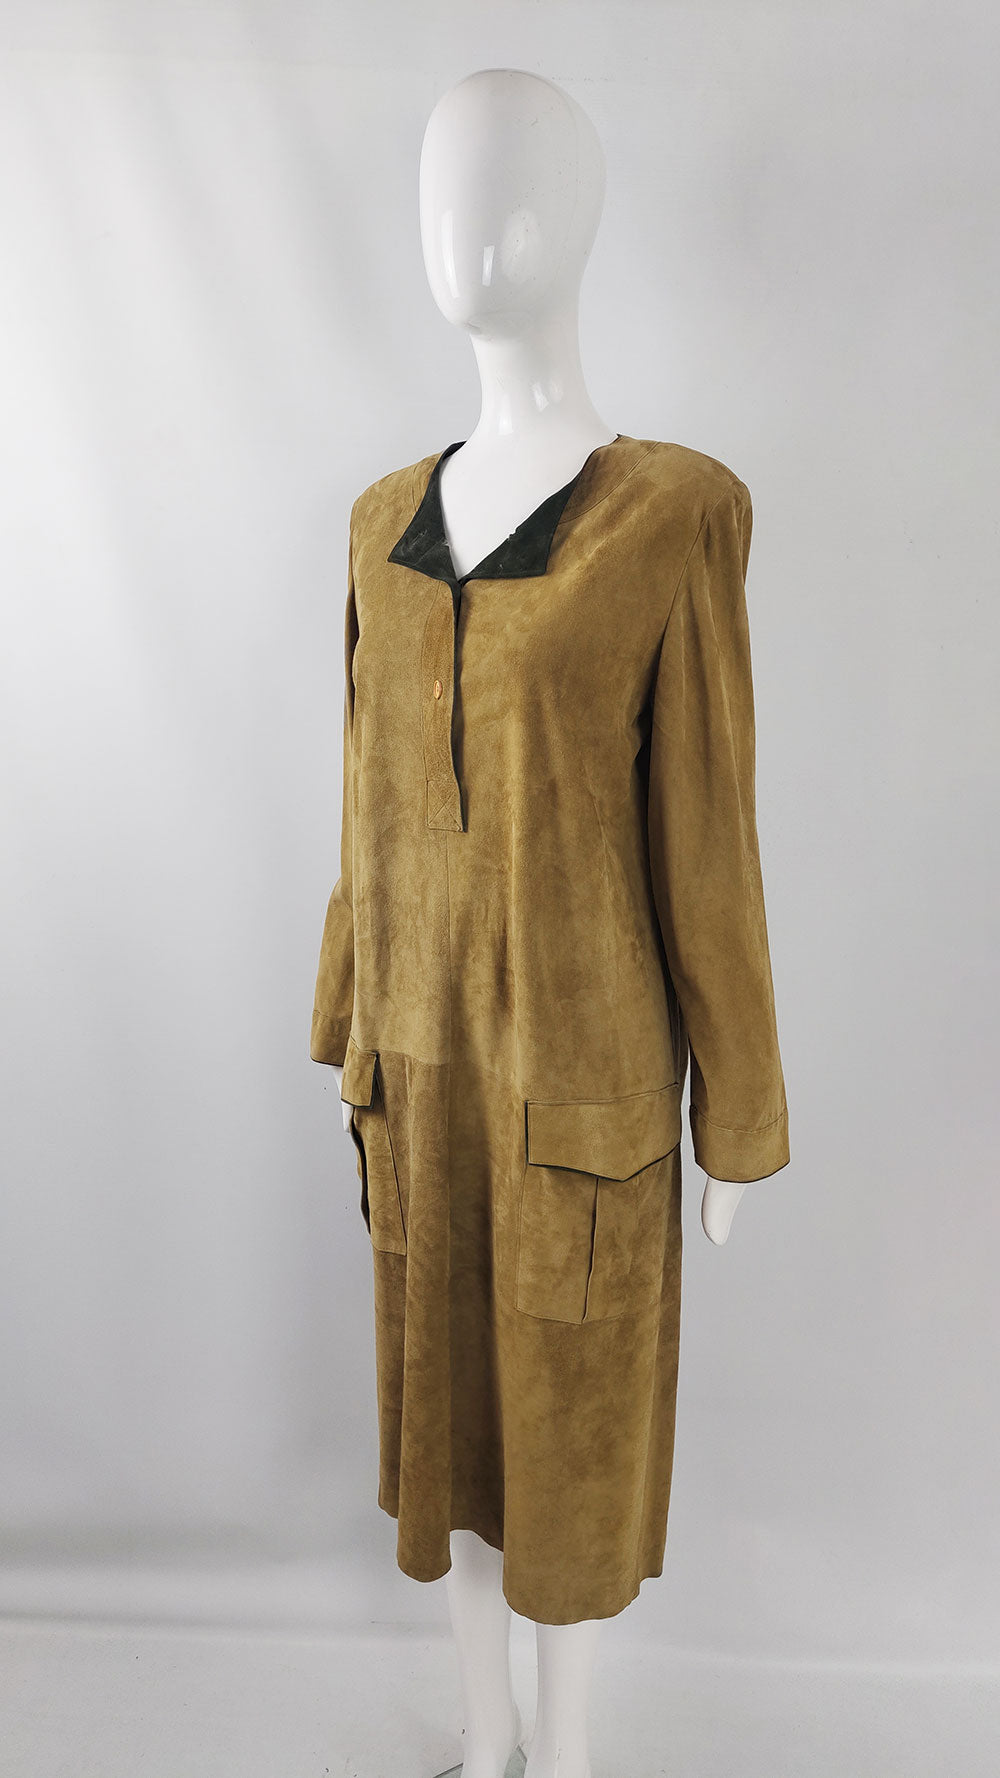 An 80s dress made from a tan and green suede fabric with an oversized fit and shoulder pads by Italian designer, Mario Valentino.